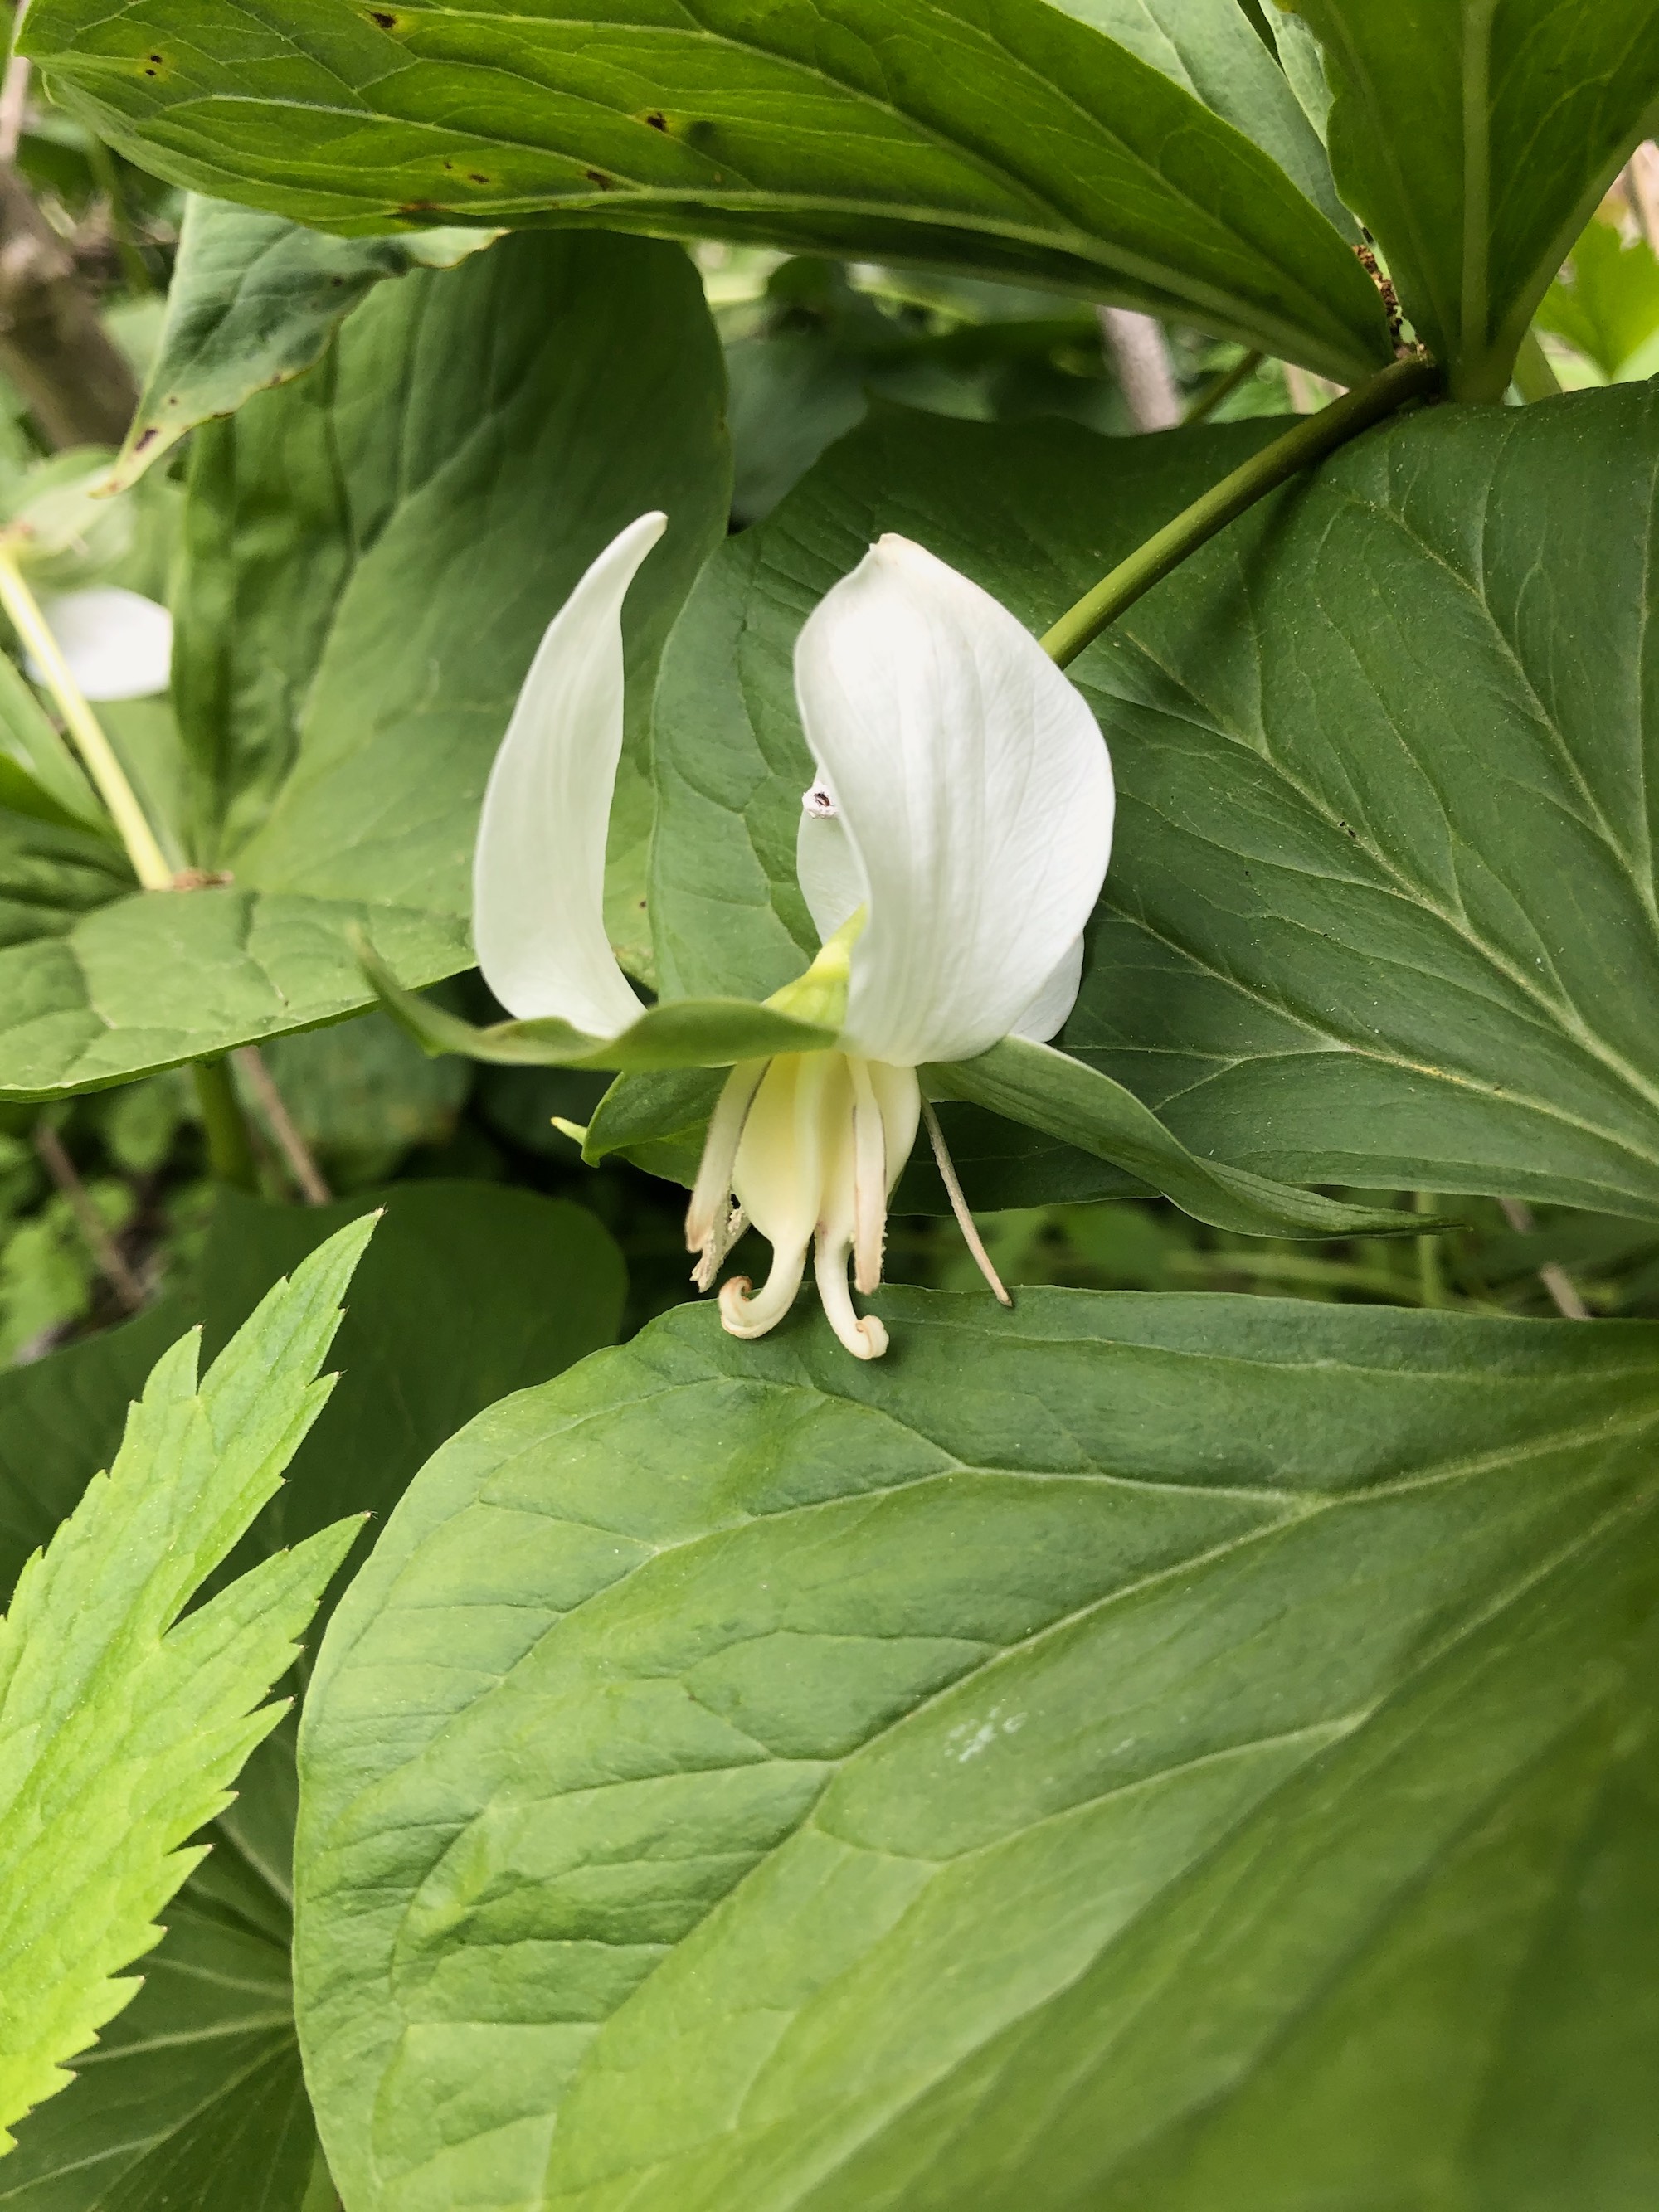 Drooping Trillium near Council Ring Spring in Madison, Wisconsin on May 18, 2021.